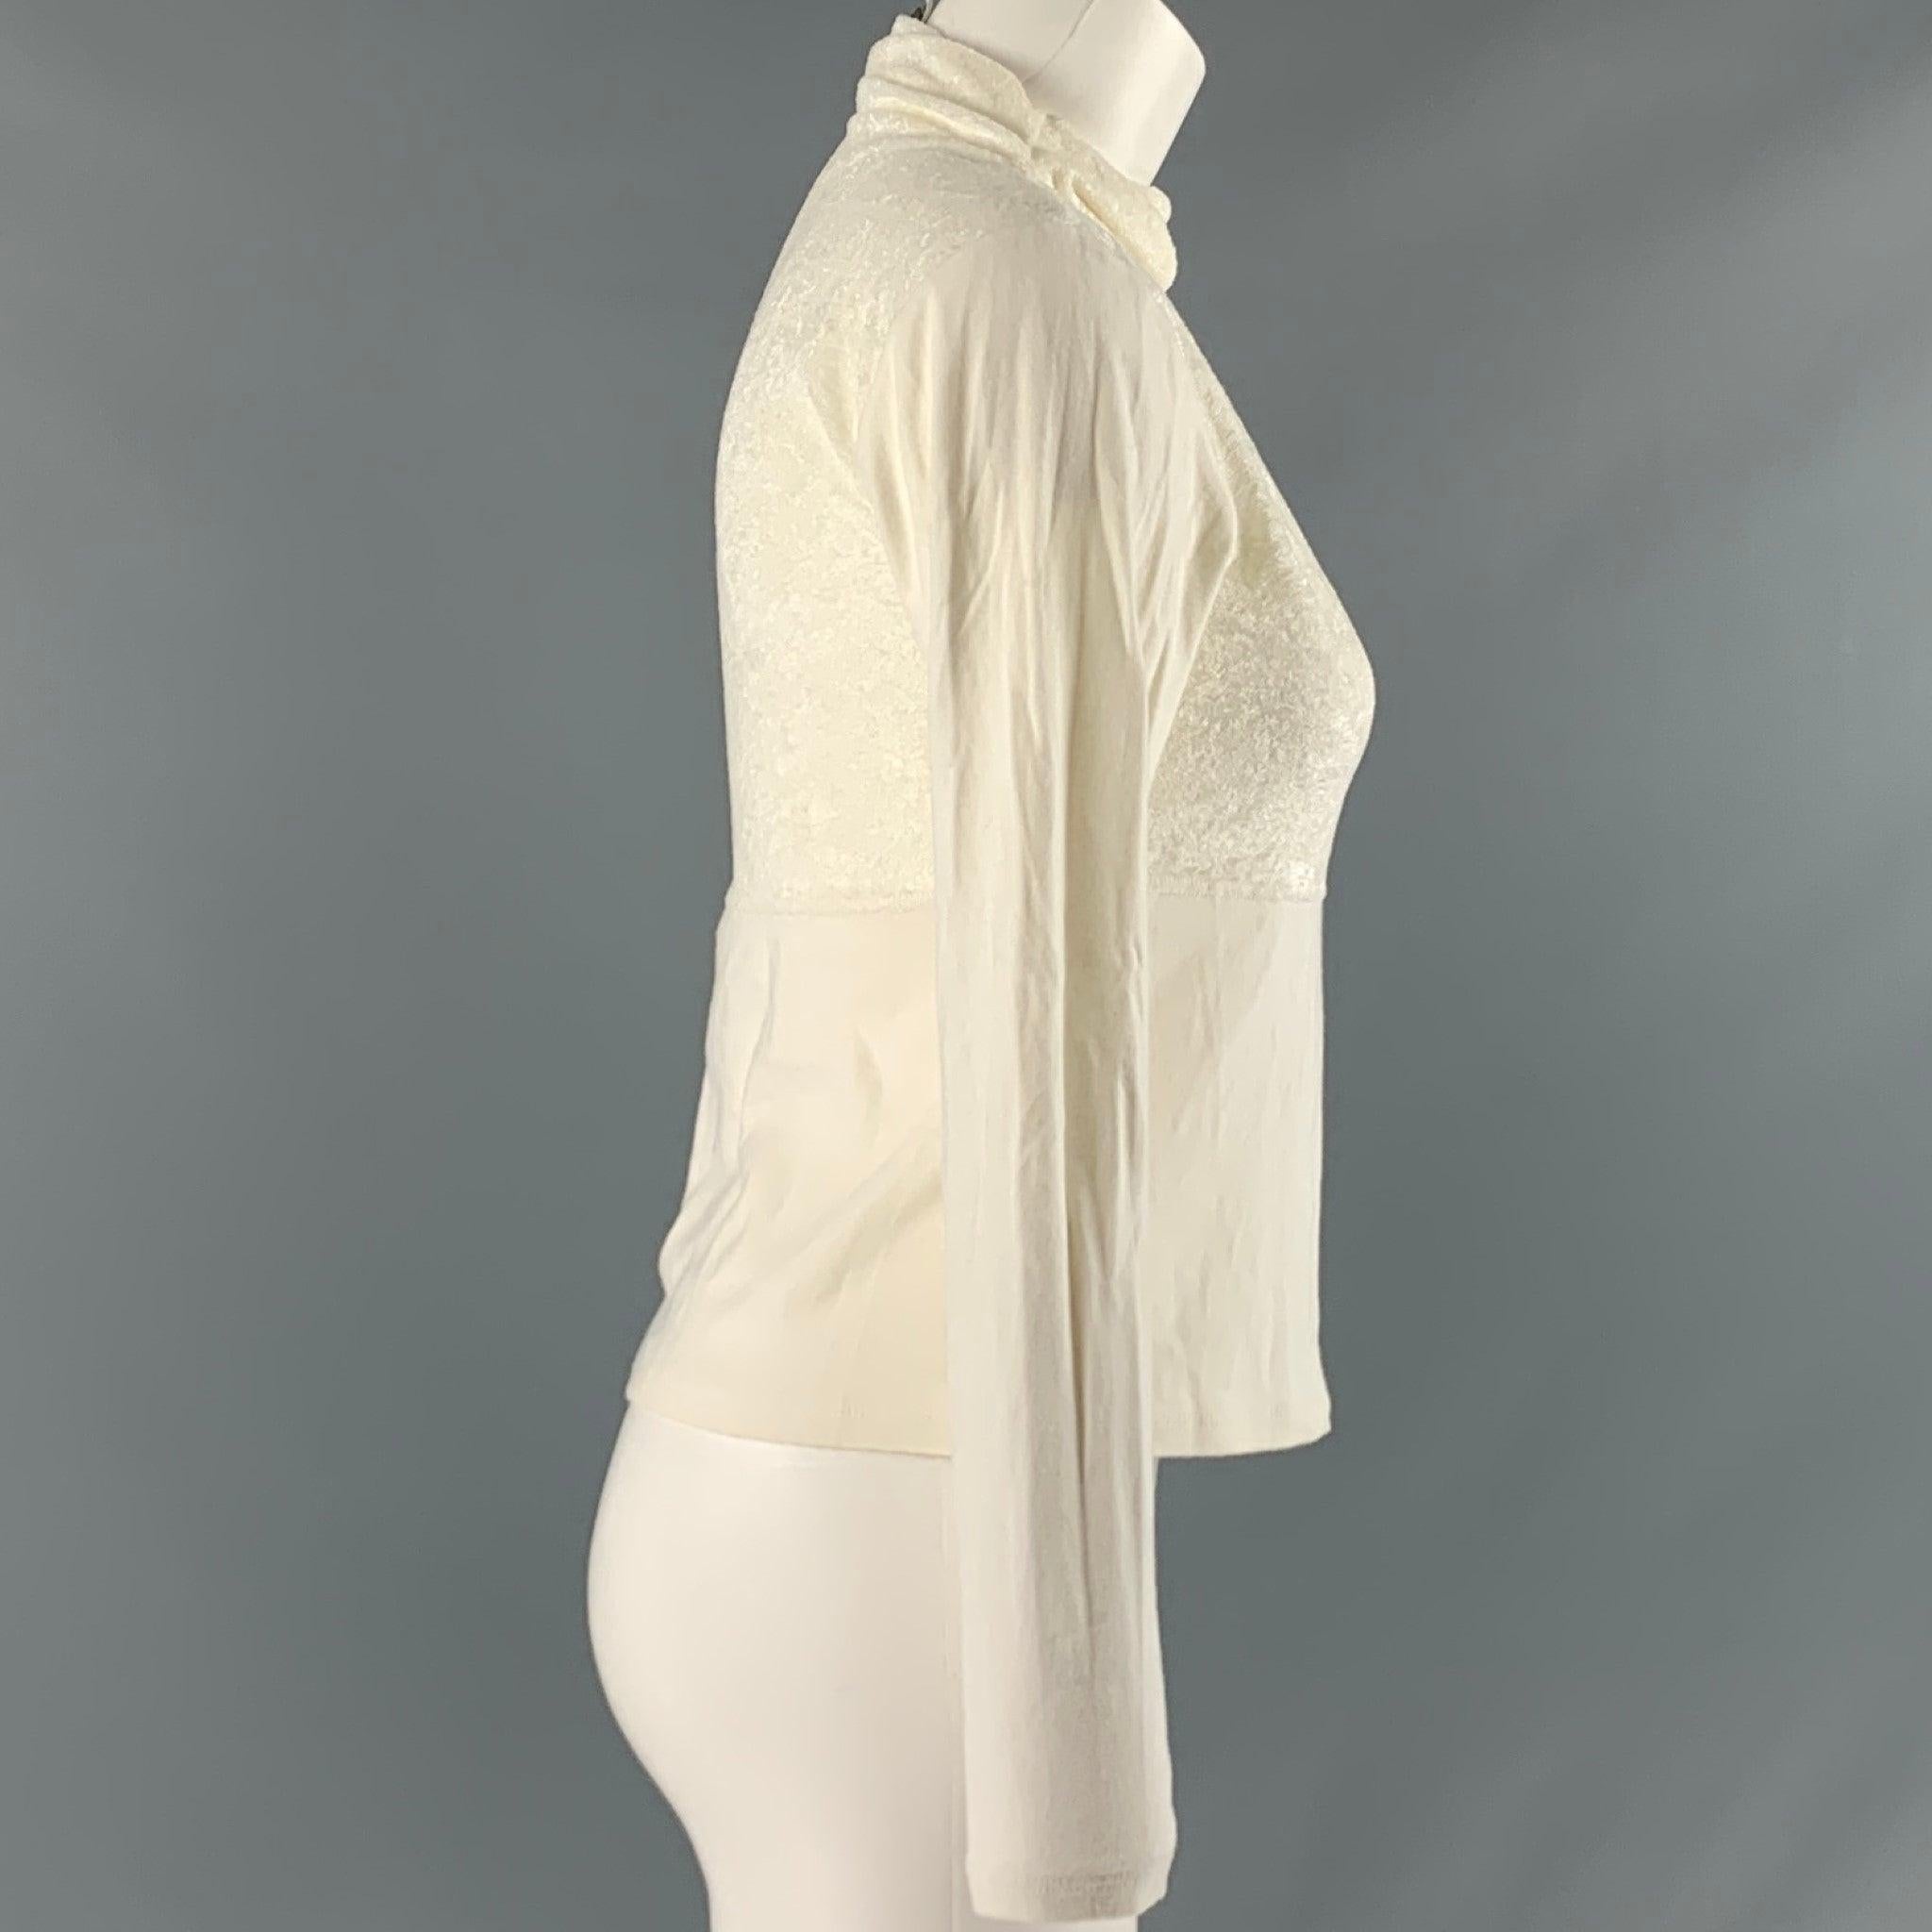 ISSEY MIYAKE WHITE LABEL casual top
in a
cream acetate polyester blend, featuring mixed textures design, long sleeves, and a mock neck. Made in Japan.Very Good Pre-Owned Condition. Minor signs of wear. 

Marked:   JP 2 

Measurements: 
 
Shoulder: